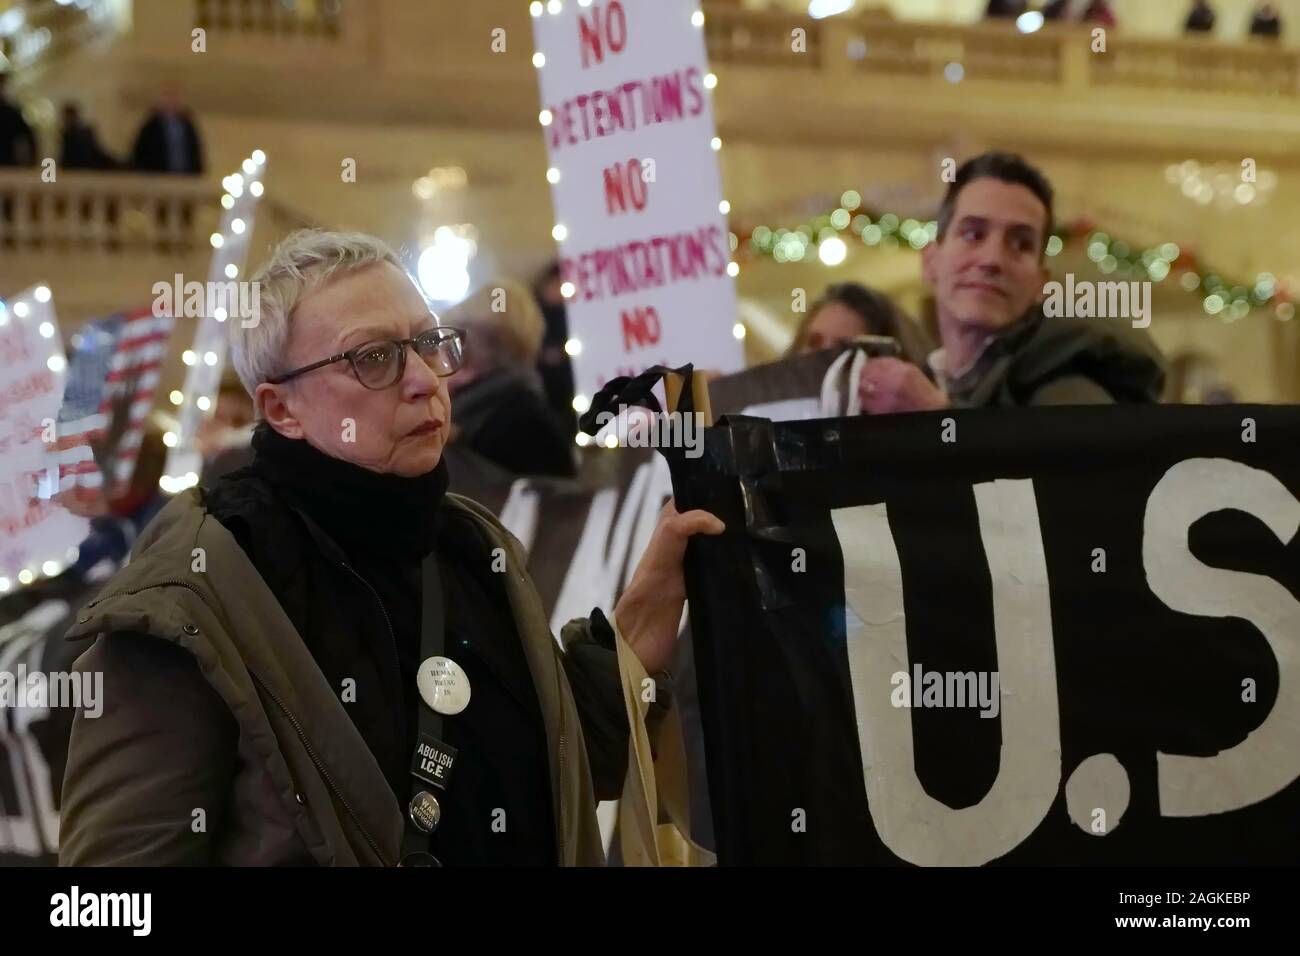 New York, NY / USA - December 19, 2019: Activist from the group Rise and Resist NYC holds up a banner and looks on stoically during a silent protest a Stock Photo